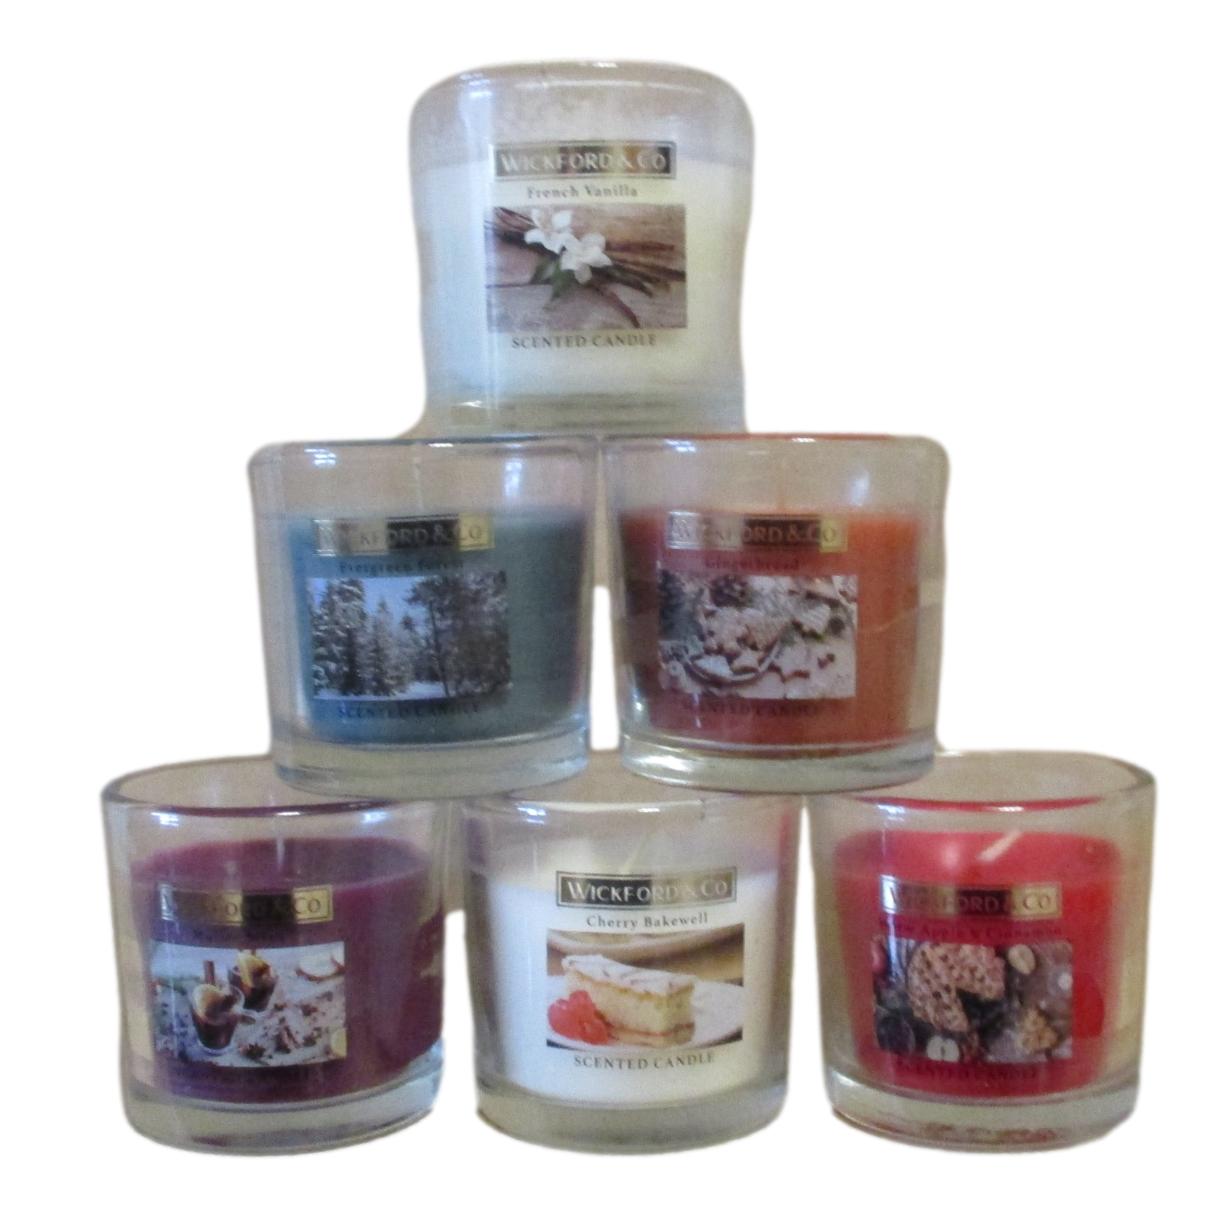 Wickford & Co – Glass Candle Gift Set – 6 x Festive Candles.